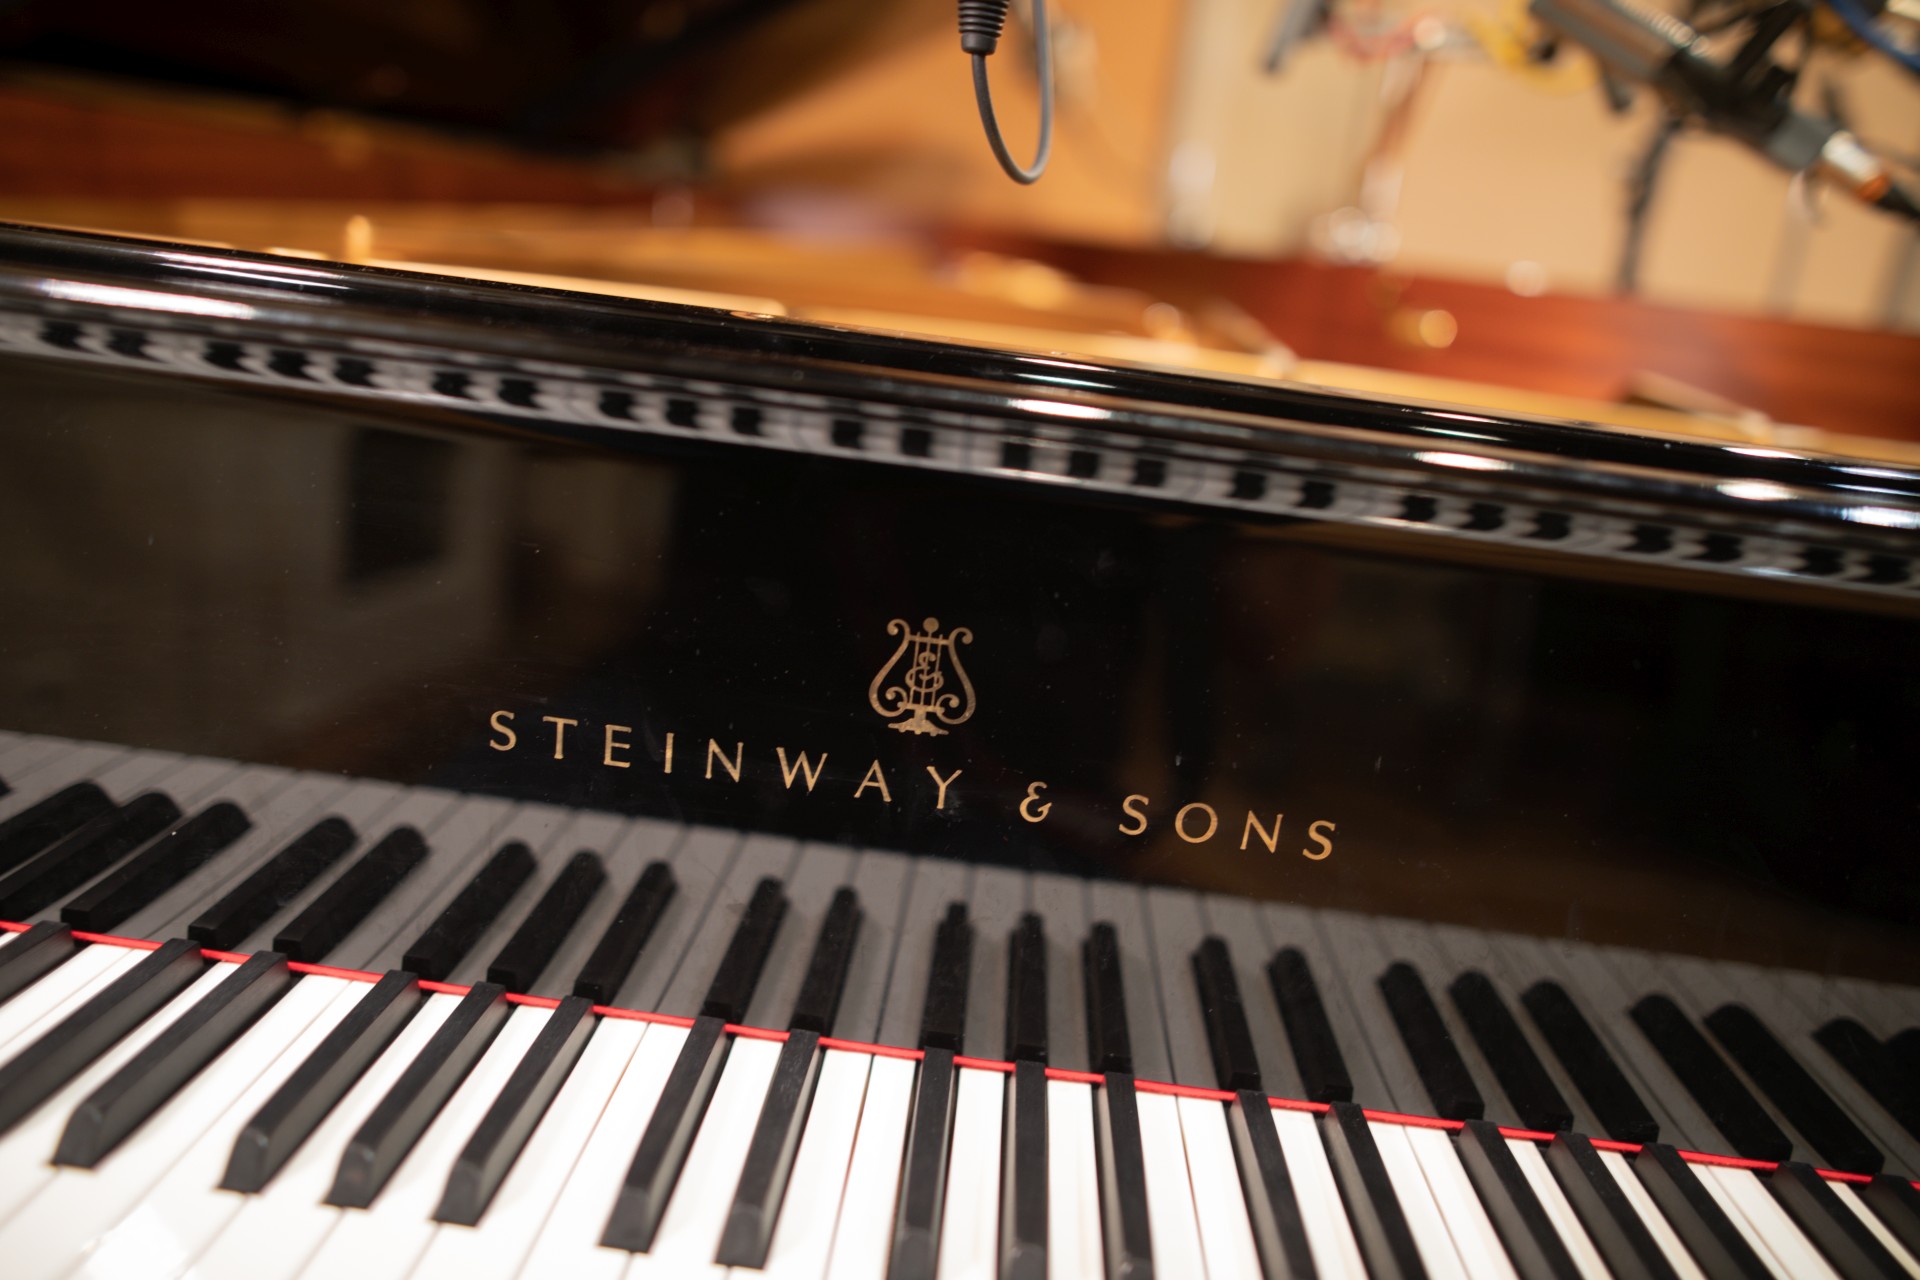 One of the most beautiful grand pianos got virtual